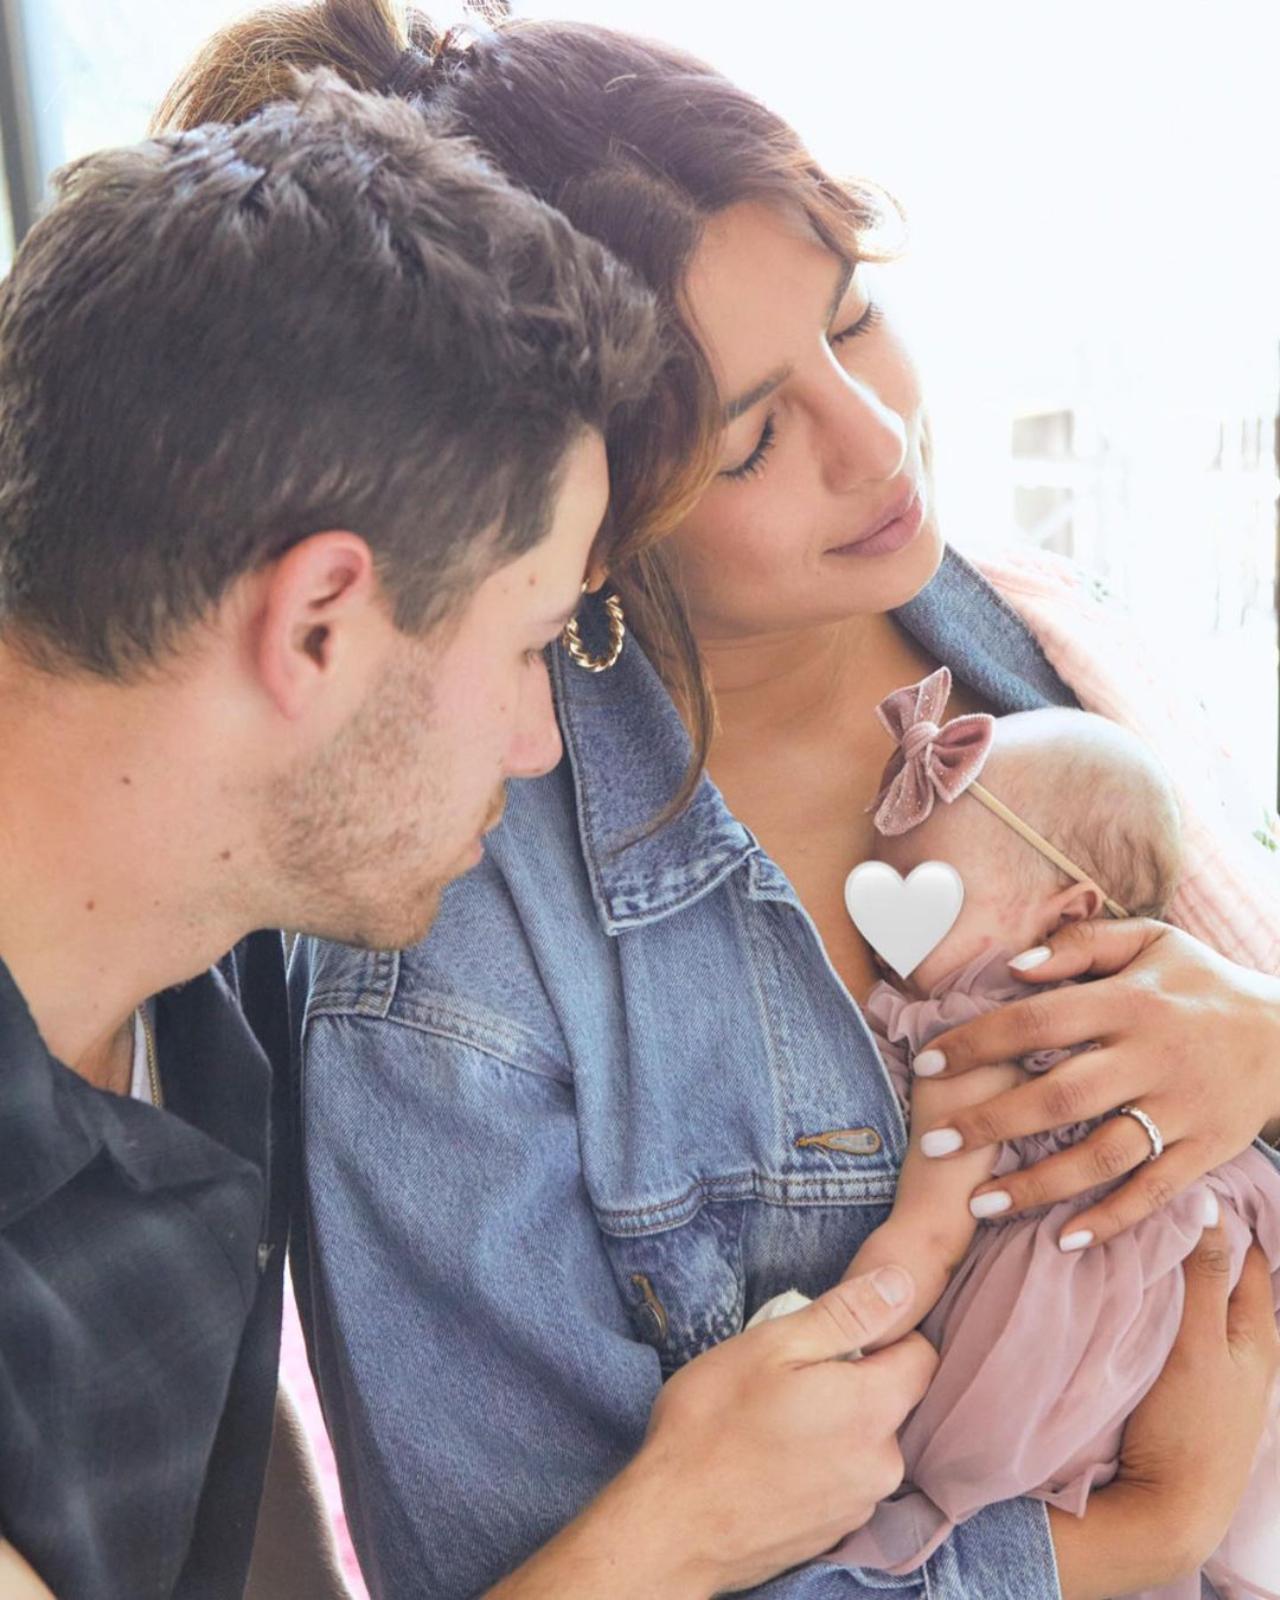 While Priyanka and Nick annouced the birth of their baby through a simple social media post in January this year, the couple shared the first picture with their daughter in May on the occasion of Mother's Day and gave an update on their daughter's health. Nick and Priyanka shared an adorable picture of the trio with Malti seen resting in Priyanka's arms